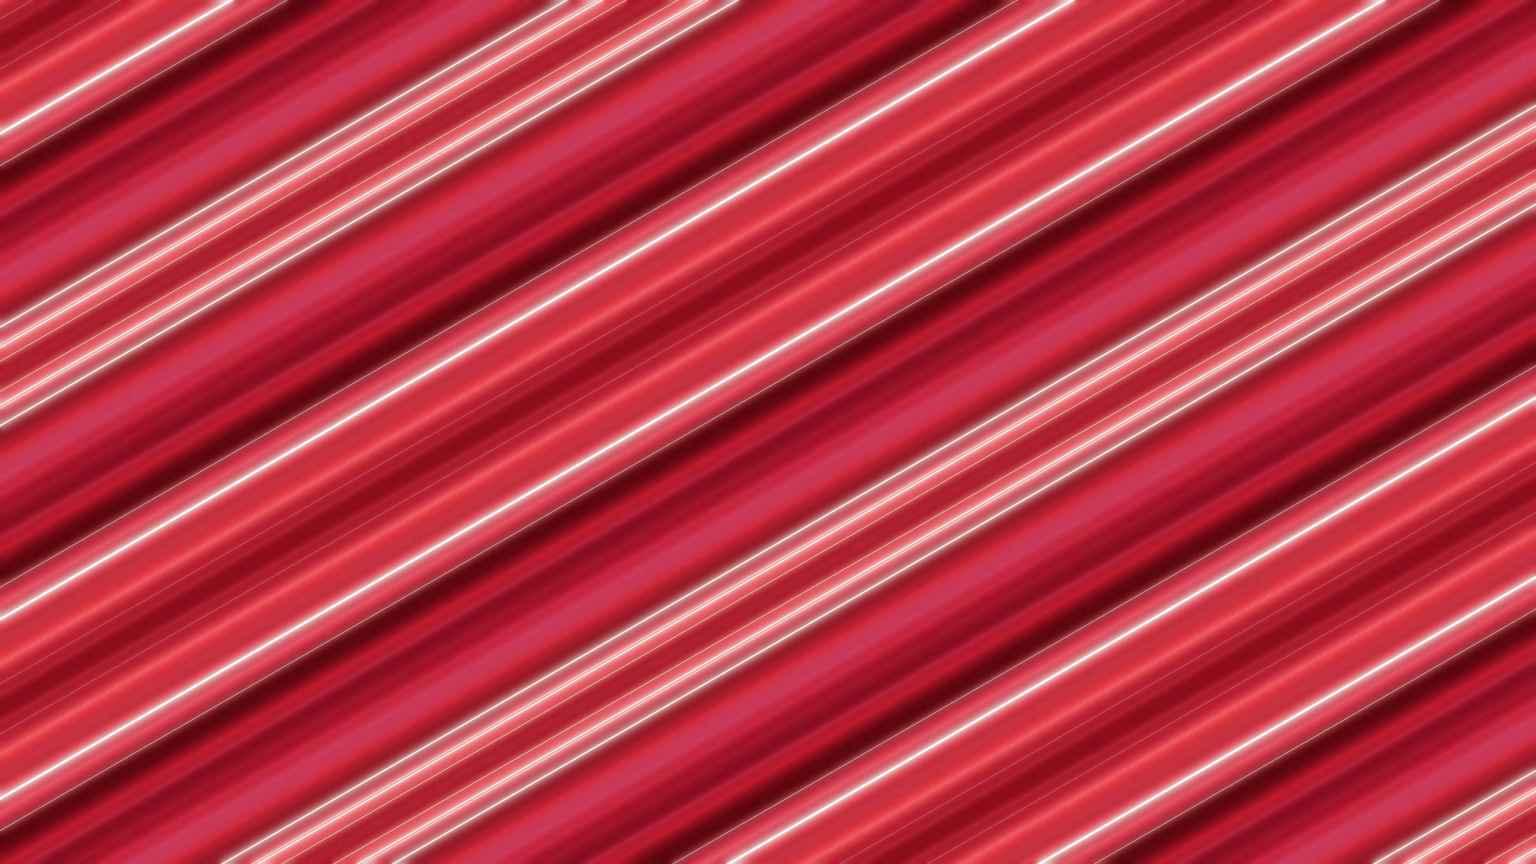 4K Red Lines Looped Motion Background || VFX Free To Use Screensaver || FREE DOWNLOAD